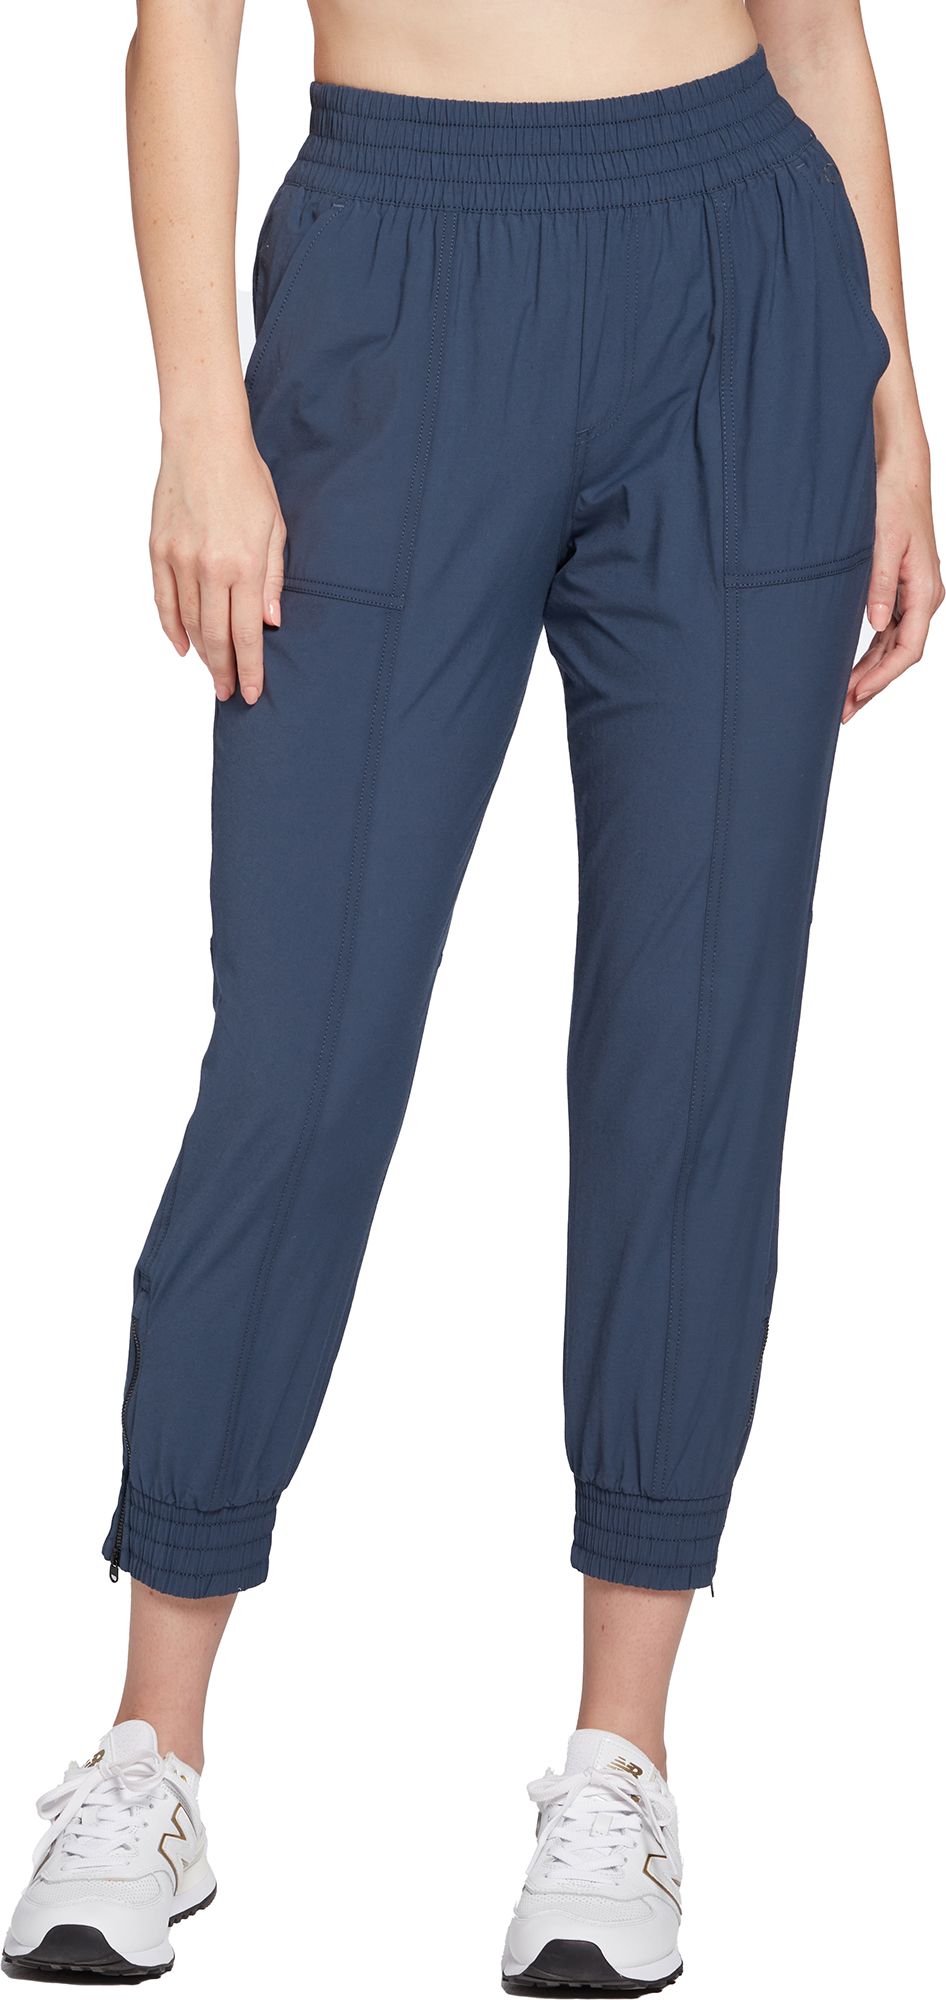 Women's Pants | Back to School at DICK'S